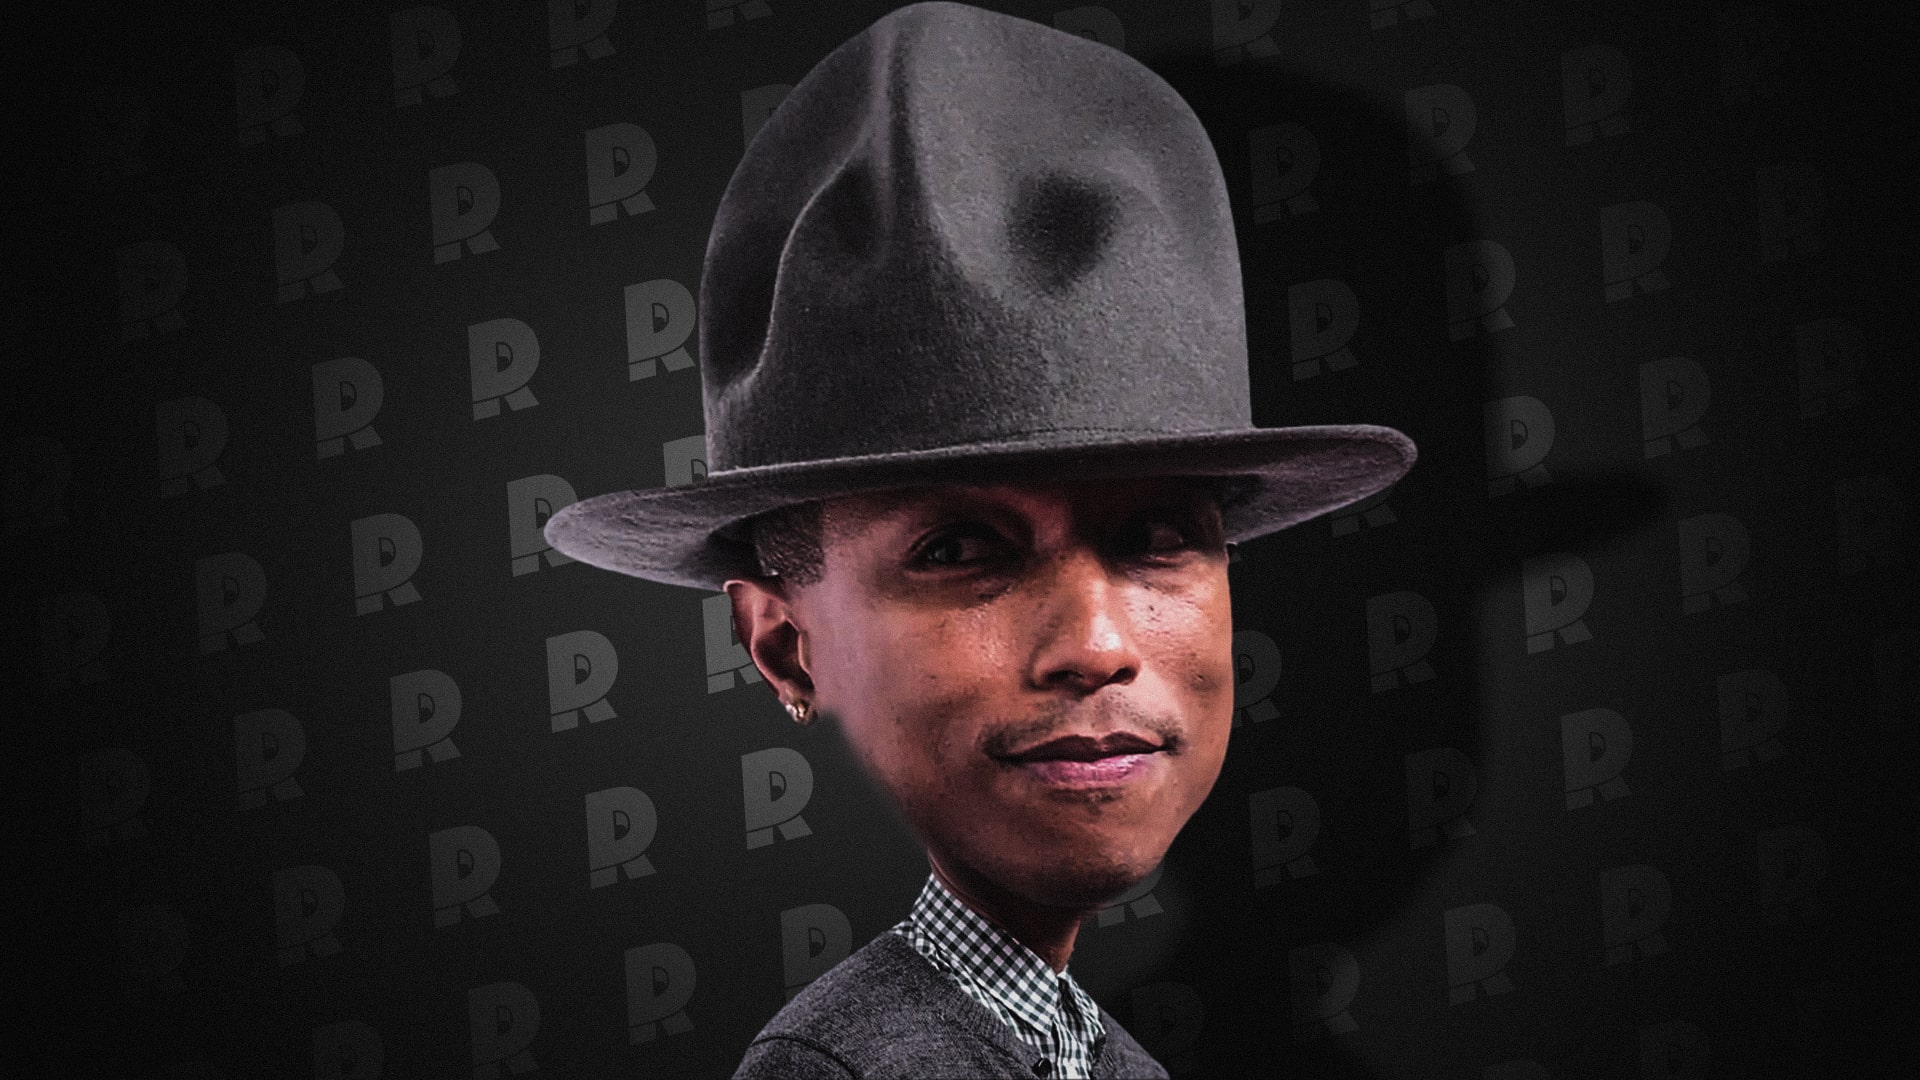 Pharrell Williams Net worth $200 Million - Who Is the Richest Hip Hop Artist in the World of 2022?